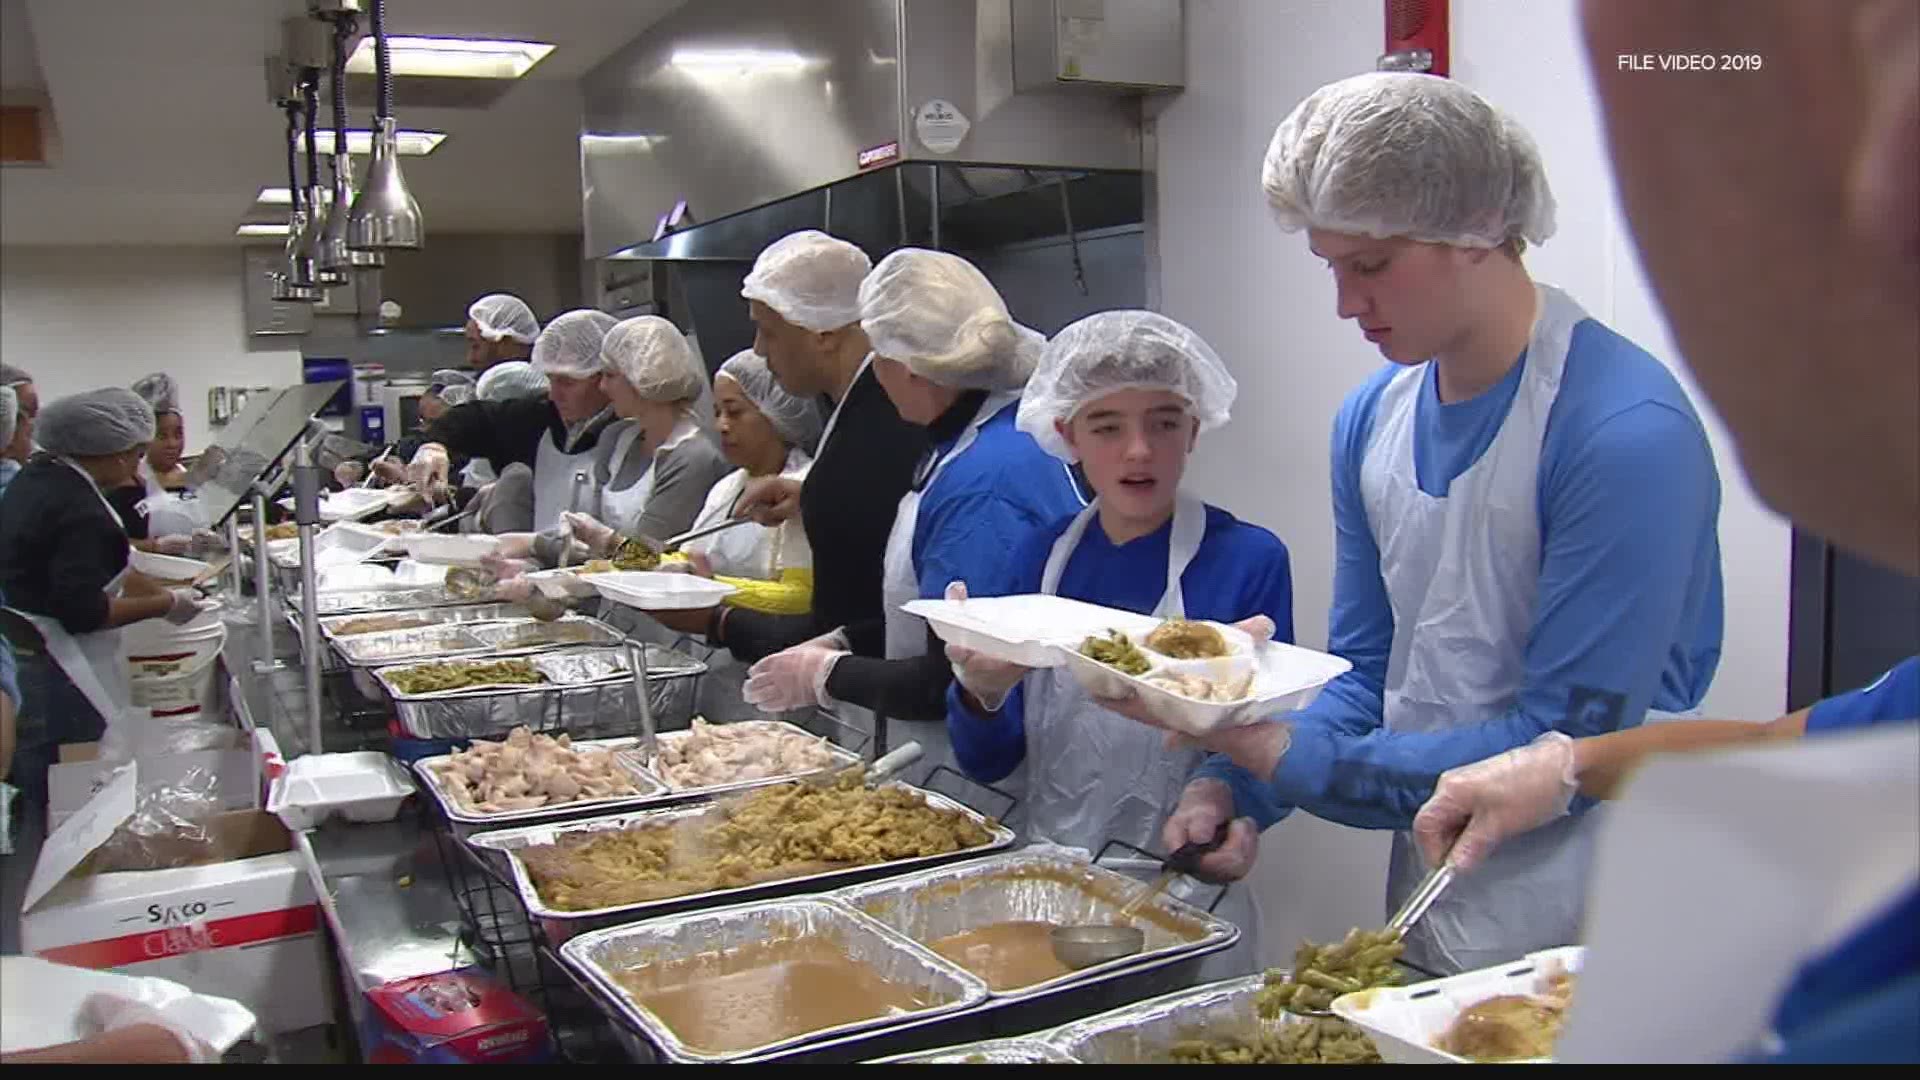 The Mozel Sanders Foundation has been serving up Thanksgiving Day meals for those in need for 48 years and it's not about to stop now, even with the pandemic.